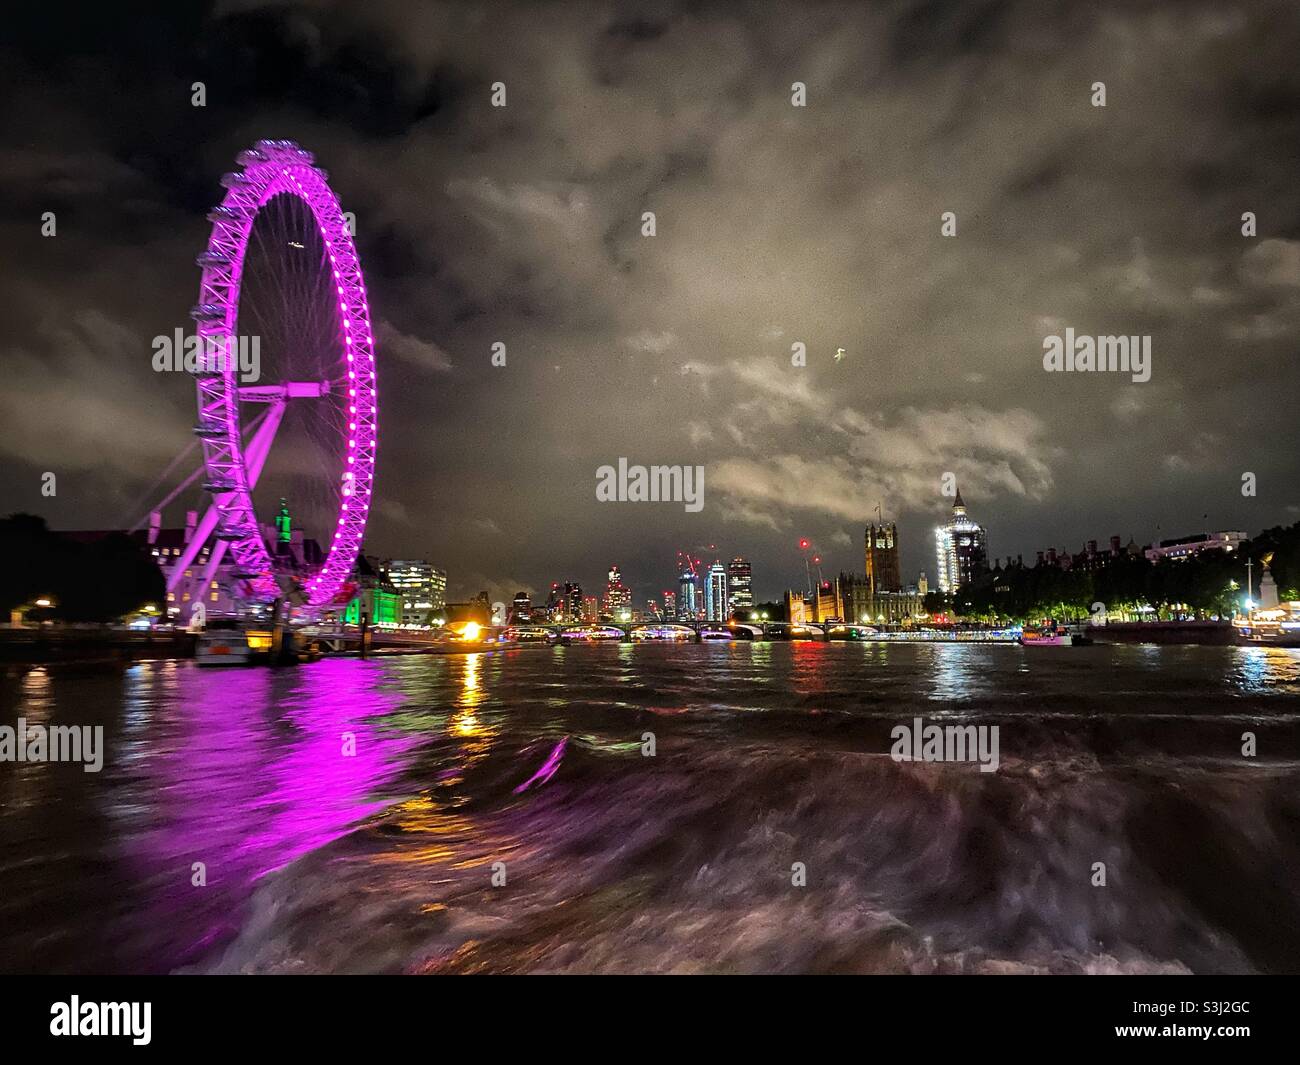 The London eye and the city skyline are seen at night in London, England on September 10 2021 Stock Photo